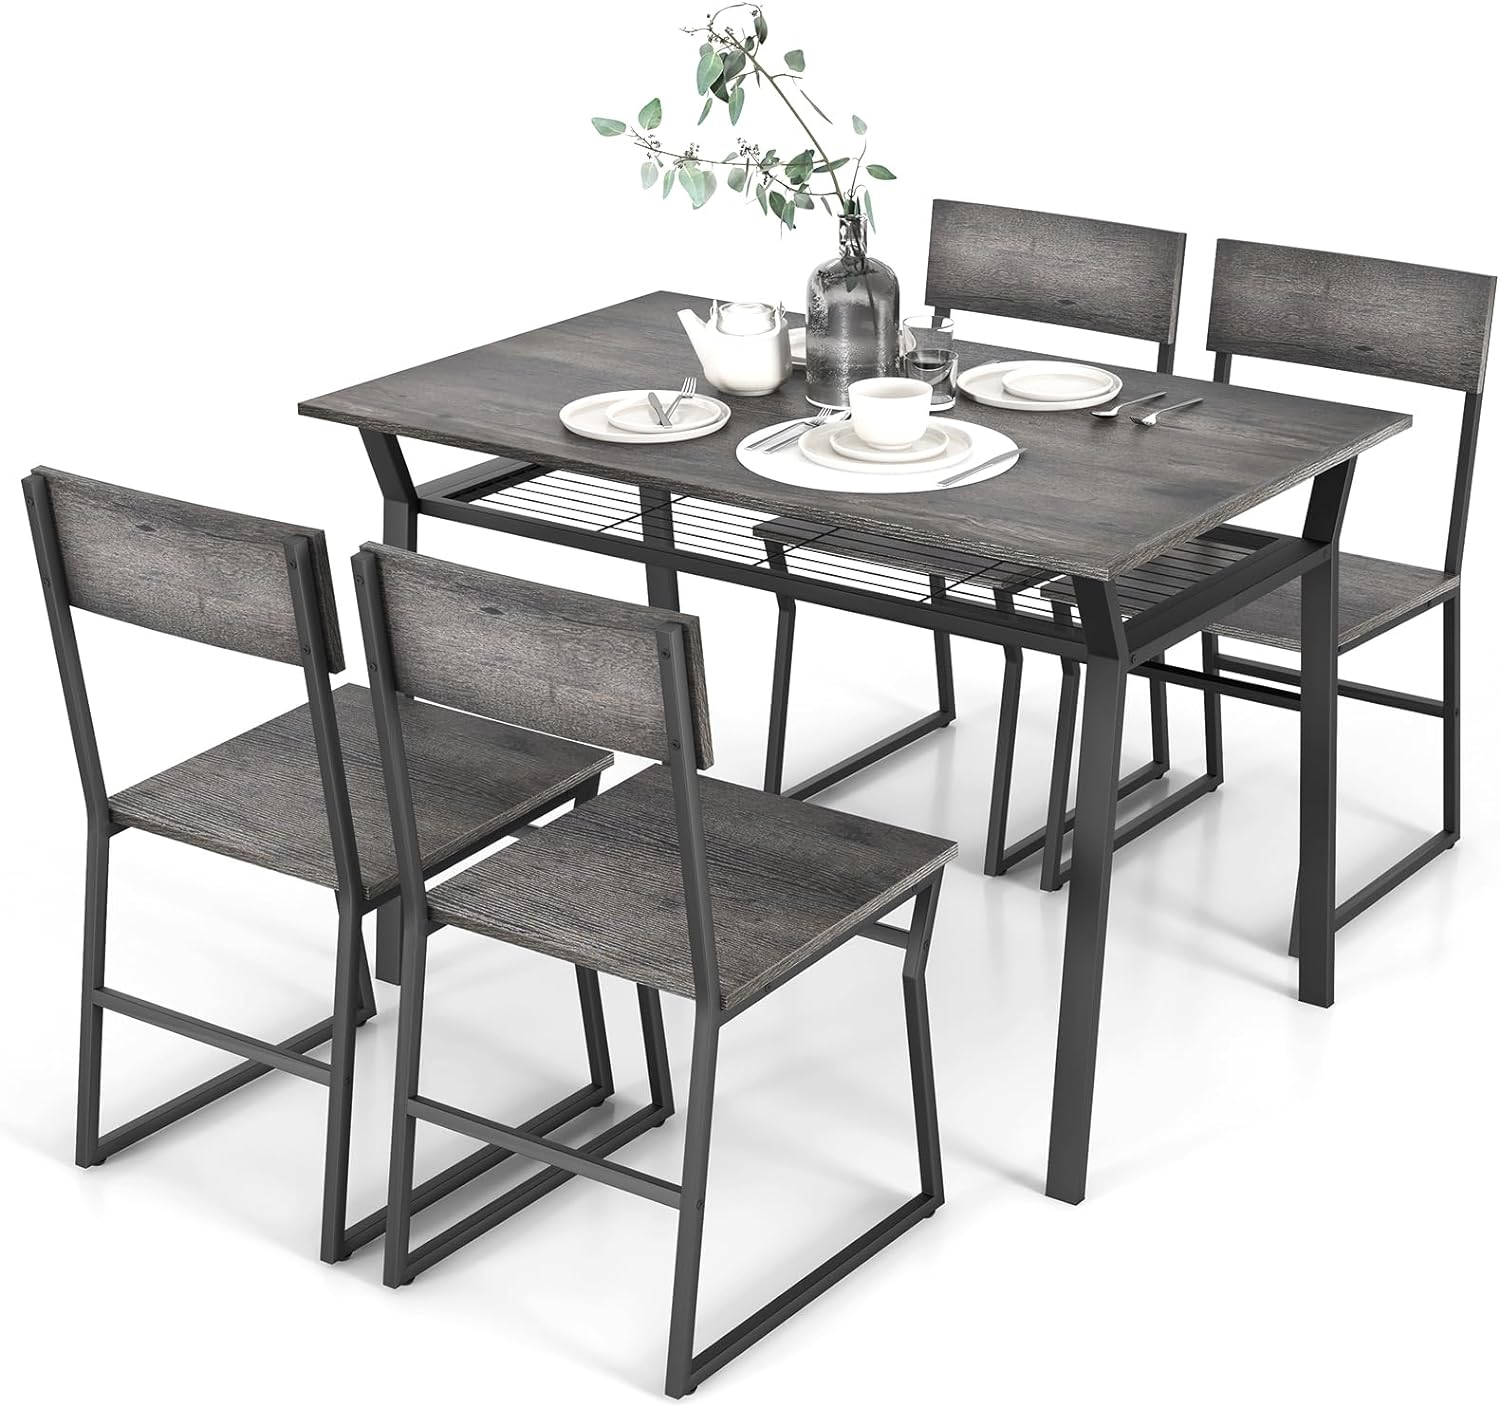 Giantex Dining Table Set for 4, 47”L x 28”W Rectangular Kitchen Table w/ 4 Trapezoid Chairs